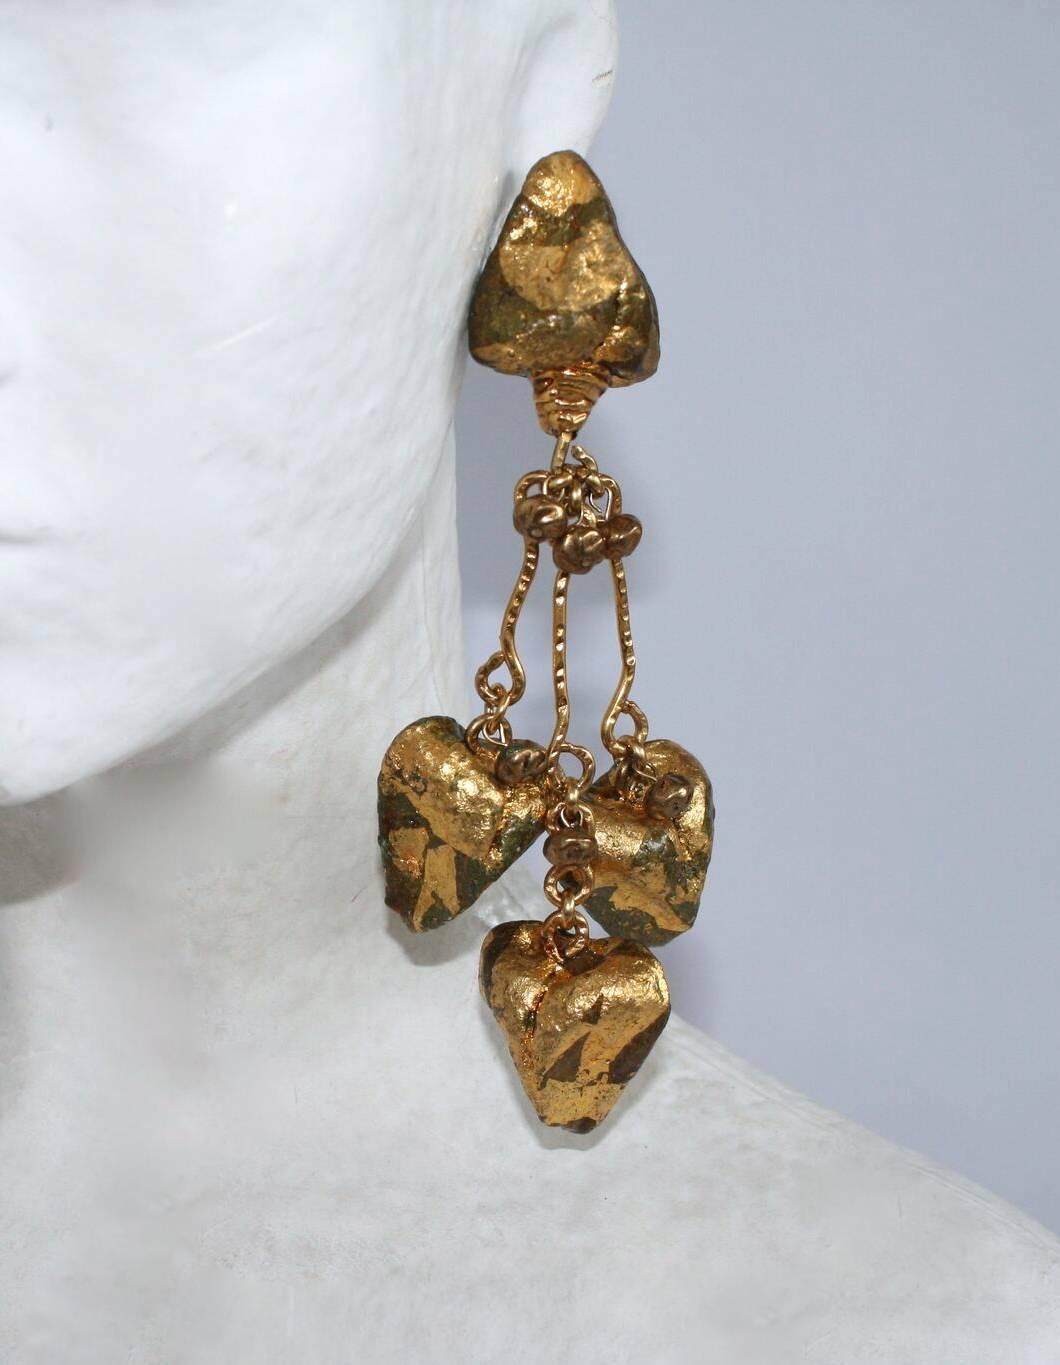 Papier-mache oversized fabulous vintage clip earrings with gold leaf detailing from Ignacio Toledo. 